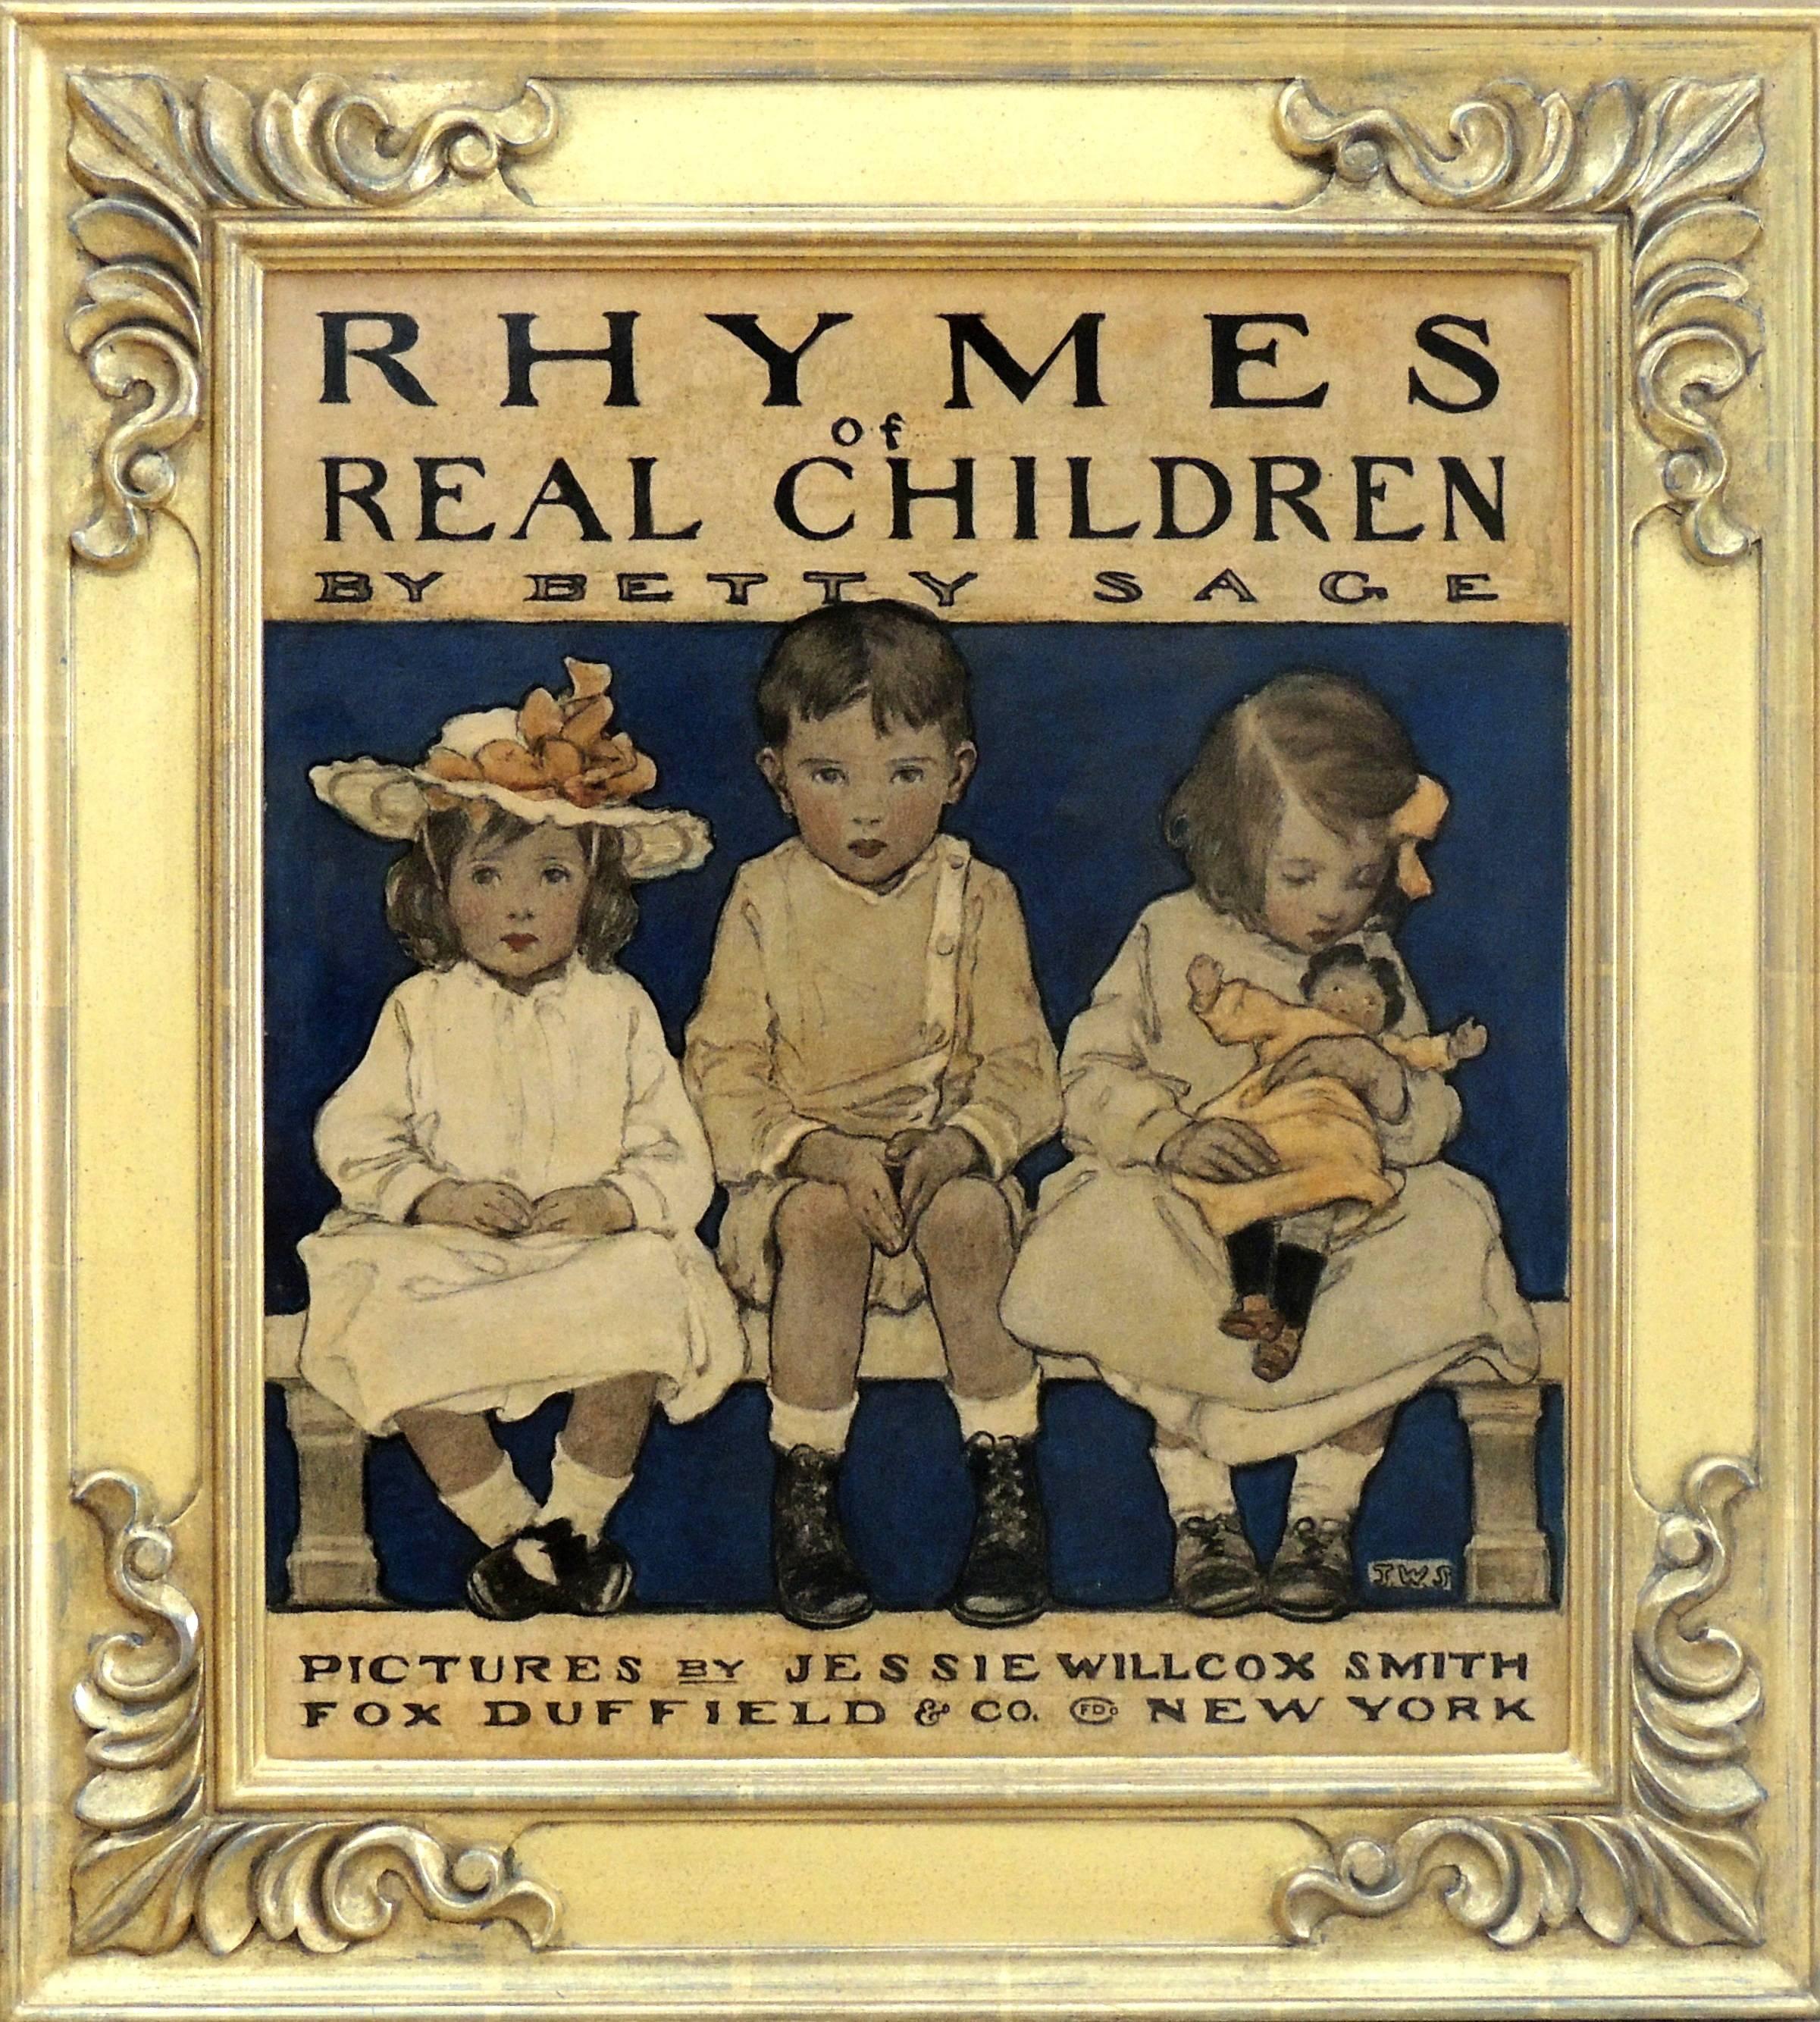 Rhymes of Real Children - Art by Jessie Willcox Smith